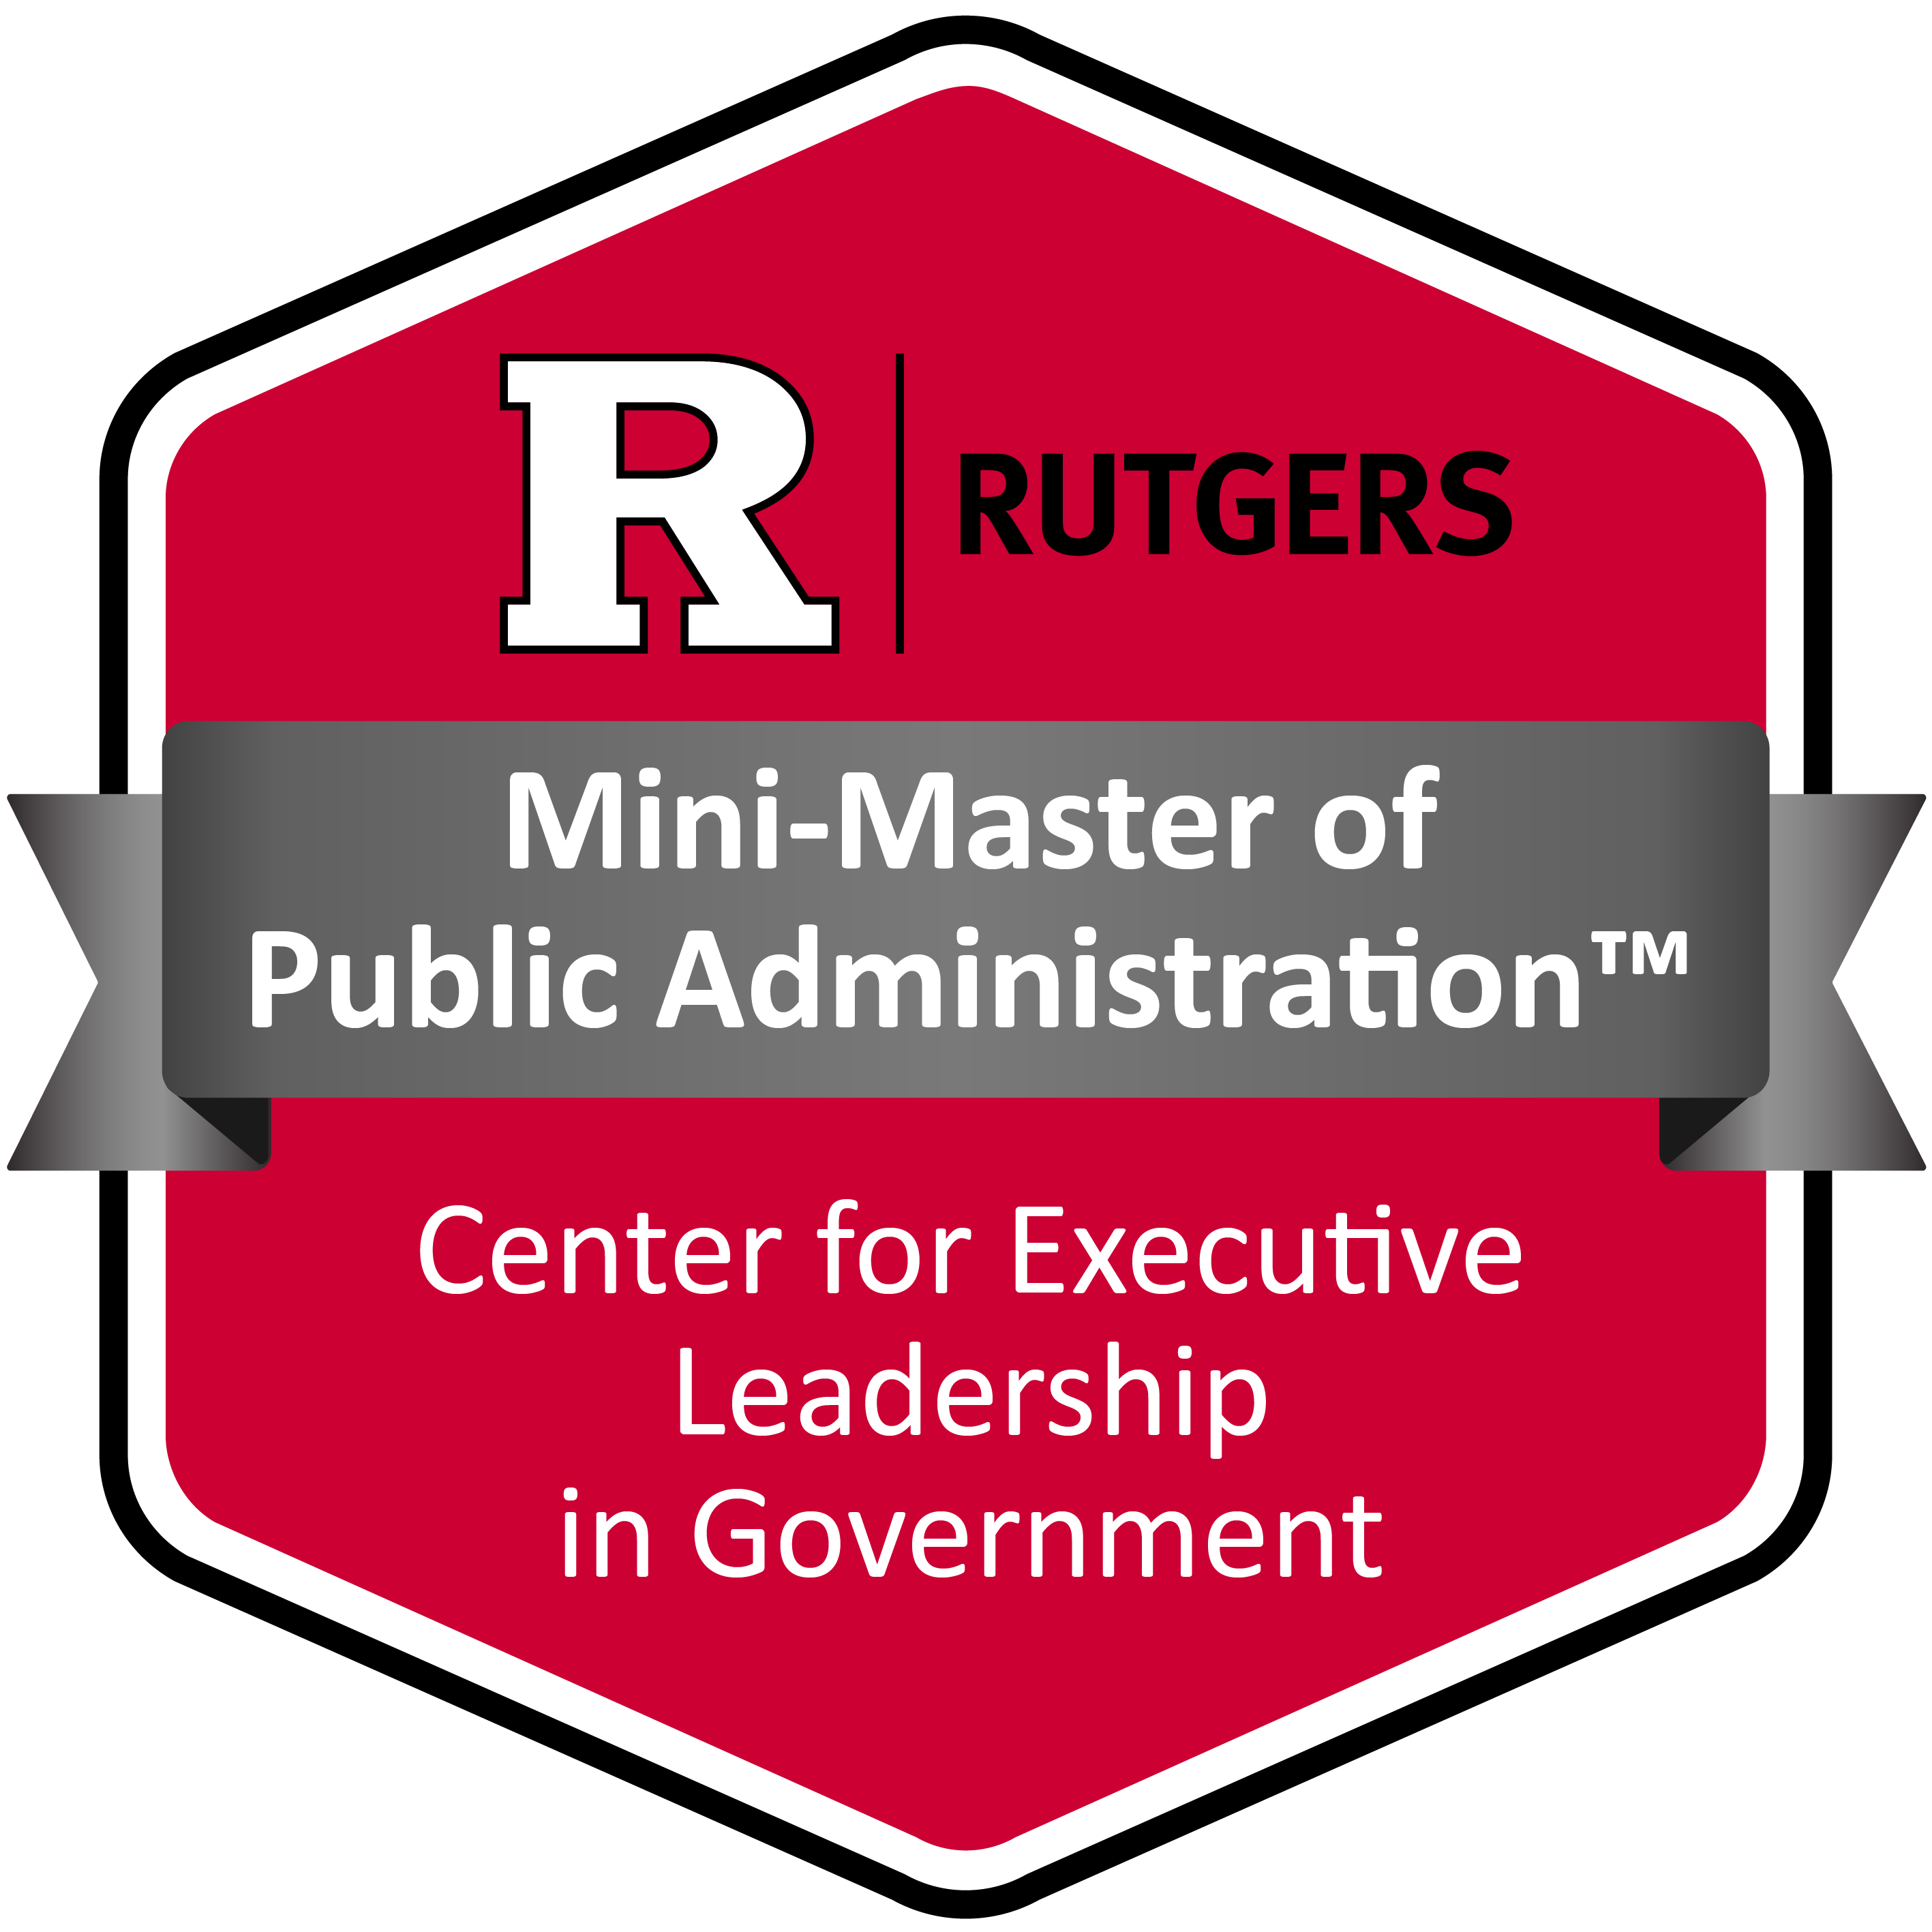 red hexagon with black border which read "Rutgers Mini-Master of Public Administration™ Center for Executive Leadership in Government""